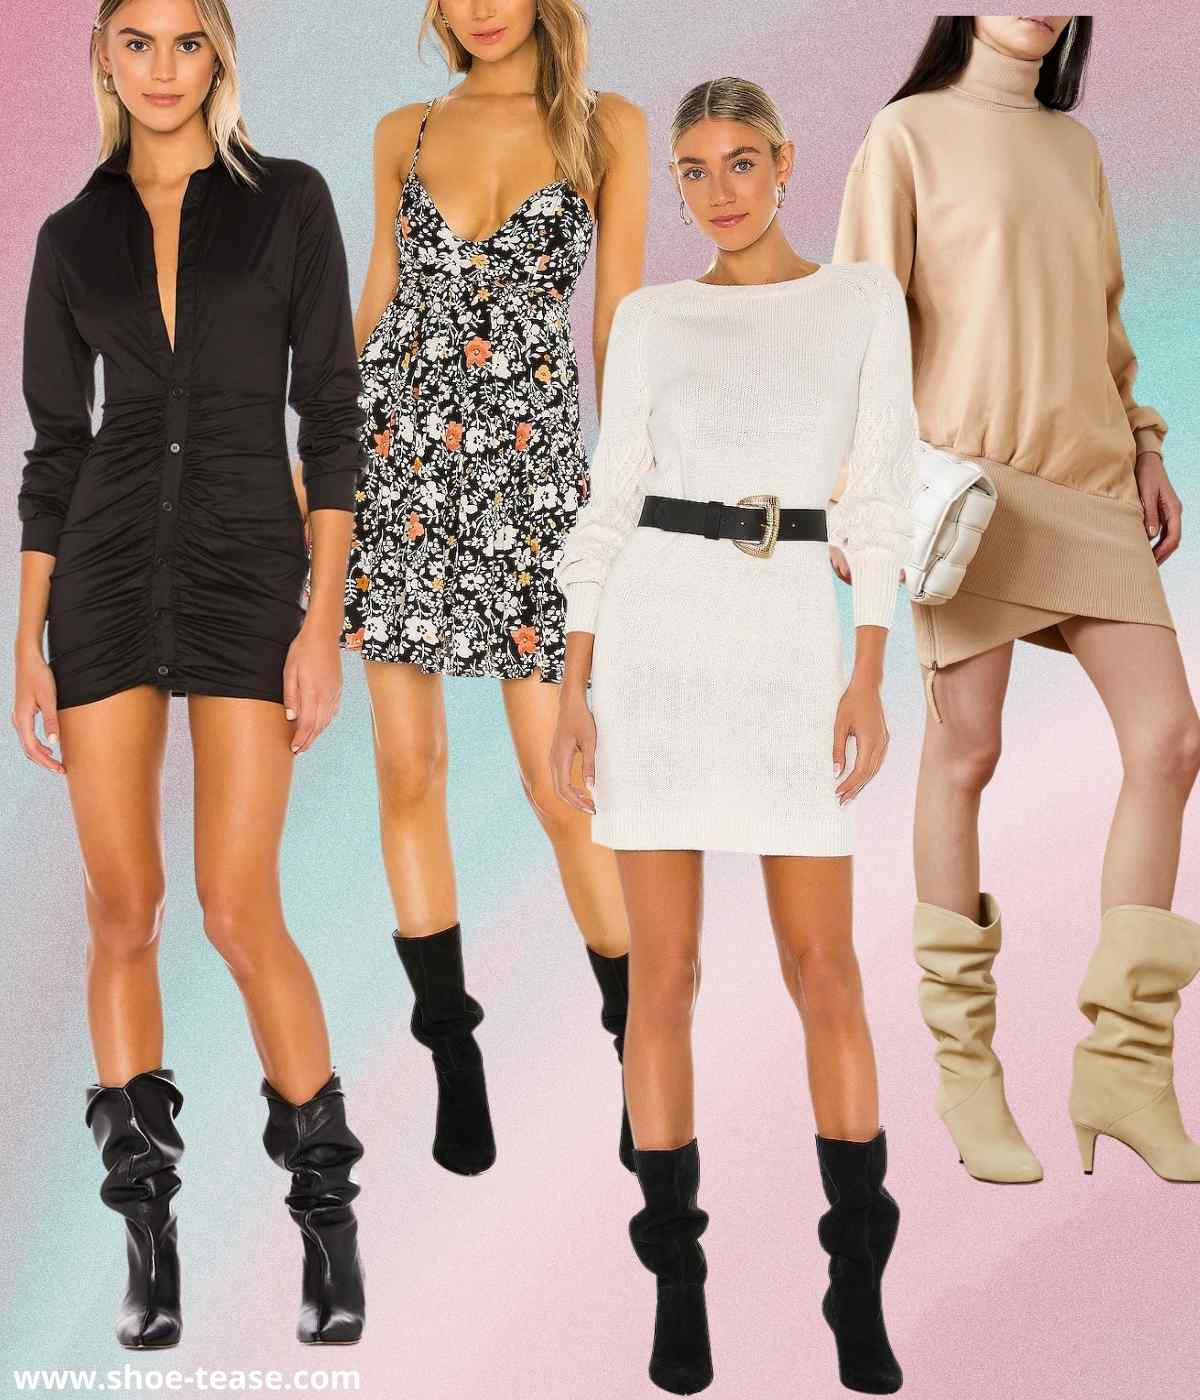 4 women wearing mini dresses with calf boots.